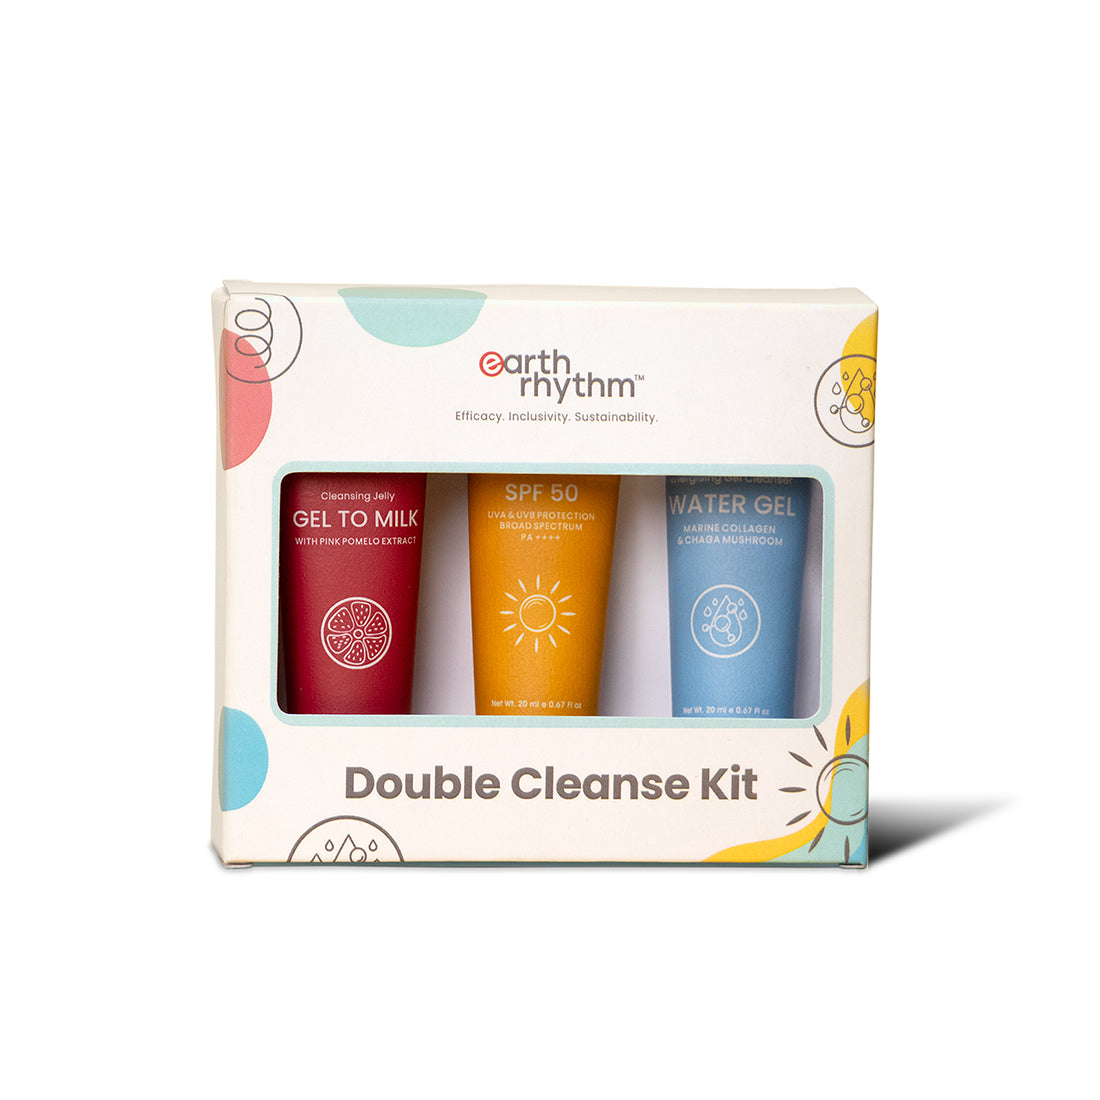 DOUBLE CLEANSE KIT (TRIAL PACK)